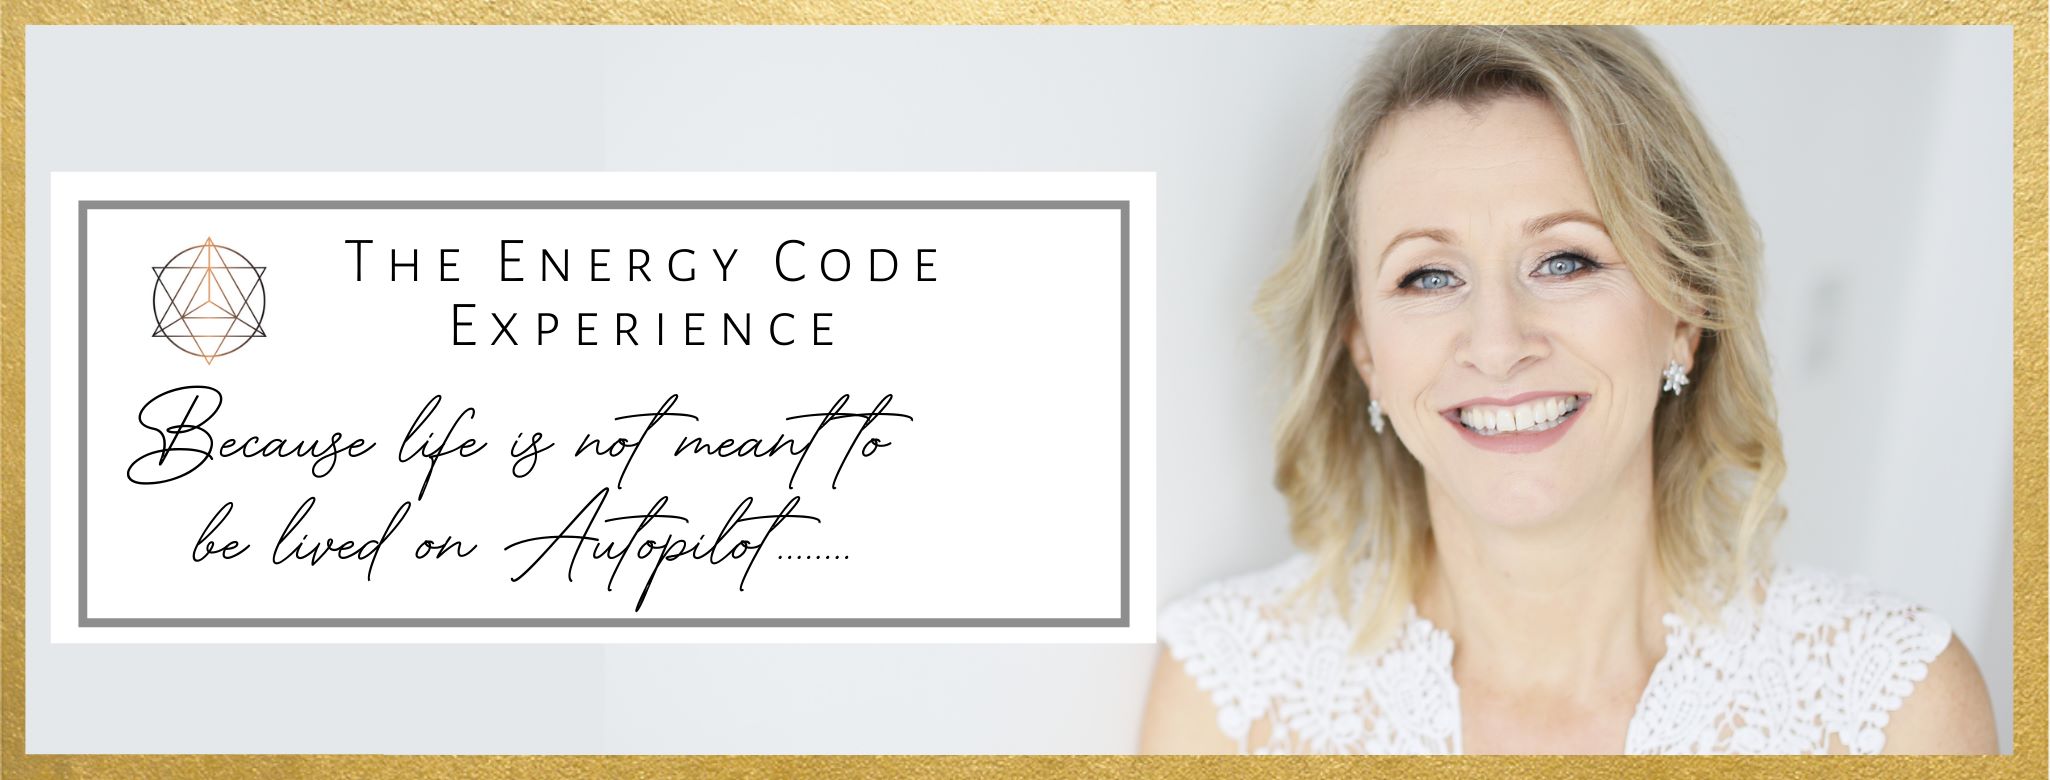 The Energy Code Experience